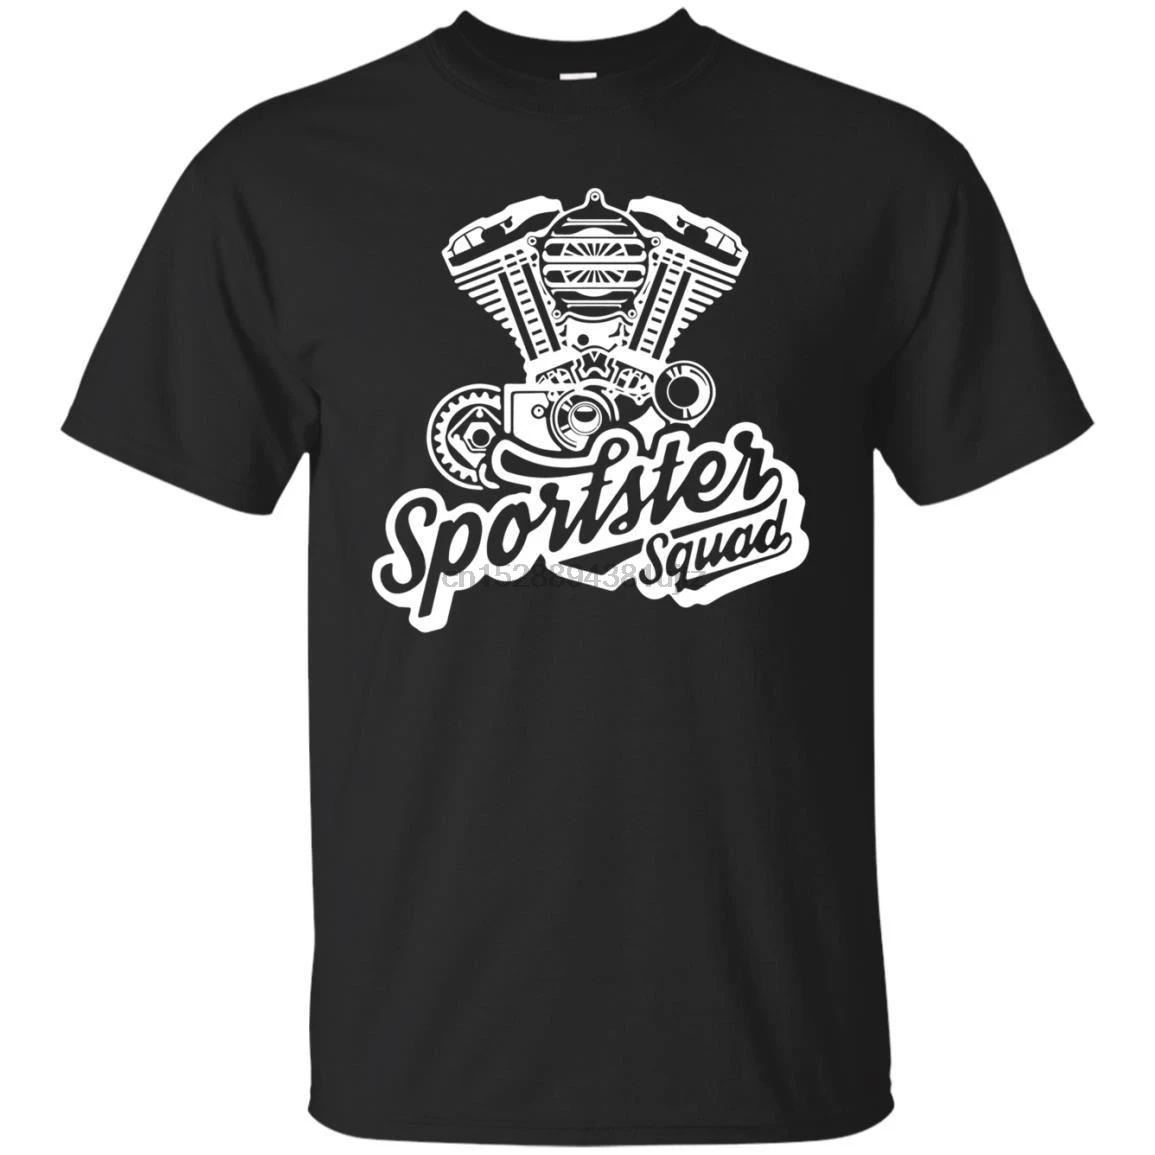 Black Navy T Shirt Sportster Squad Gear T Shirt Gift More Size and ...